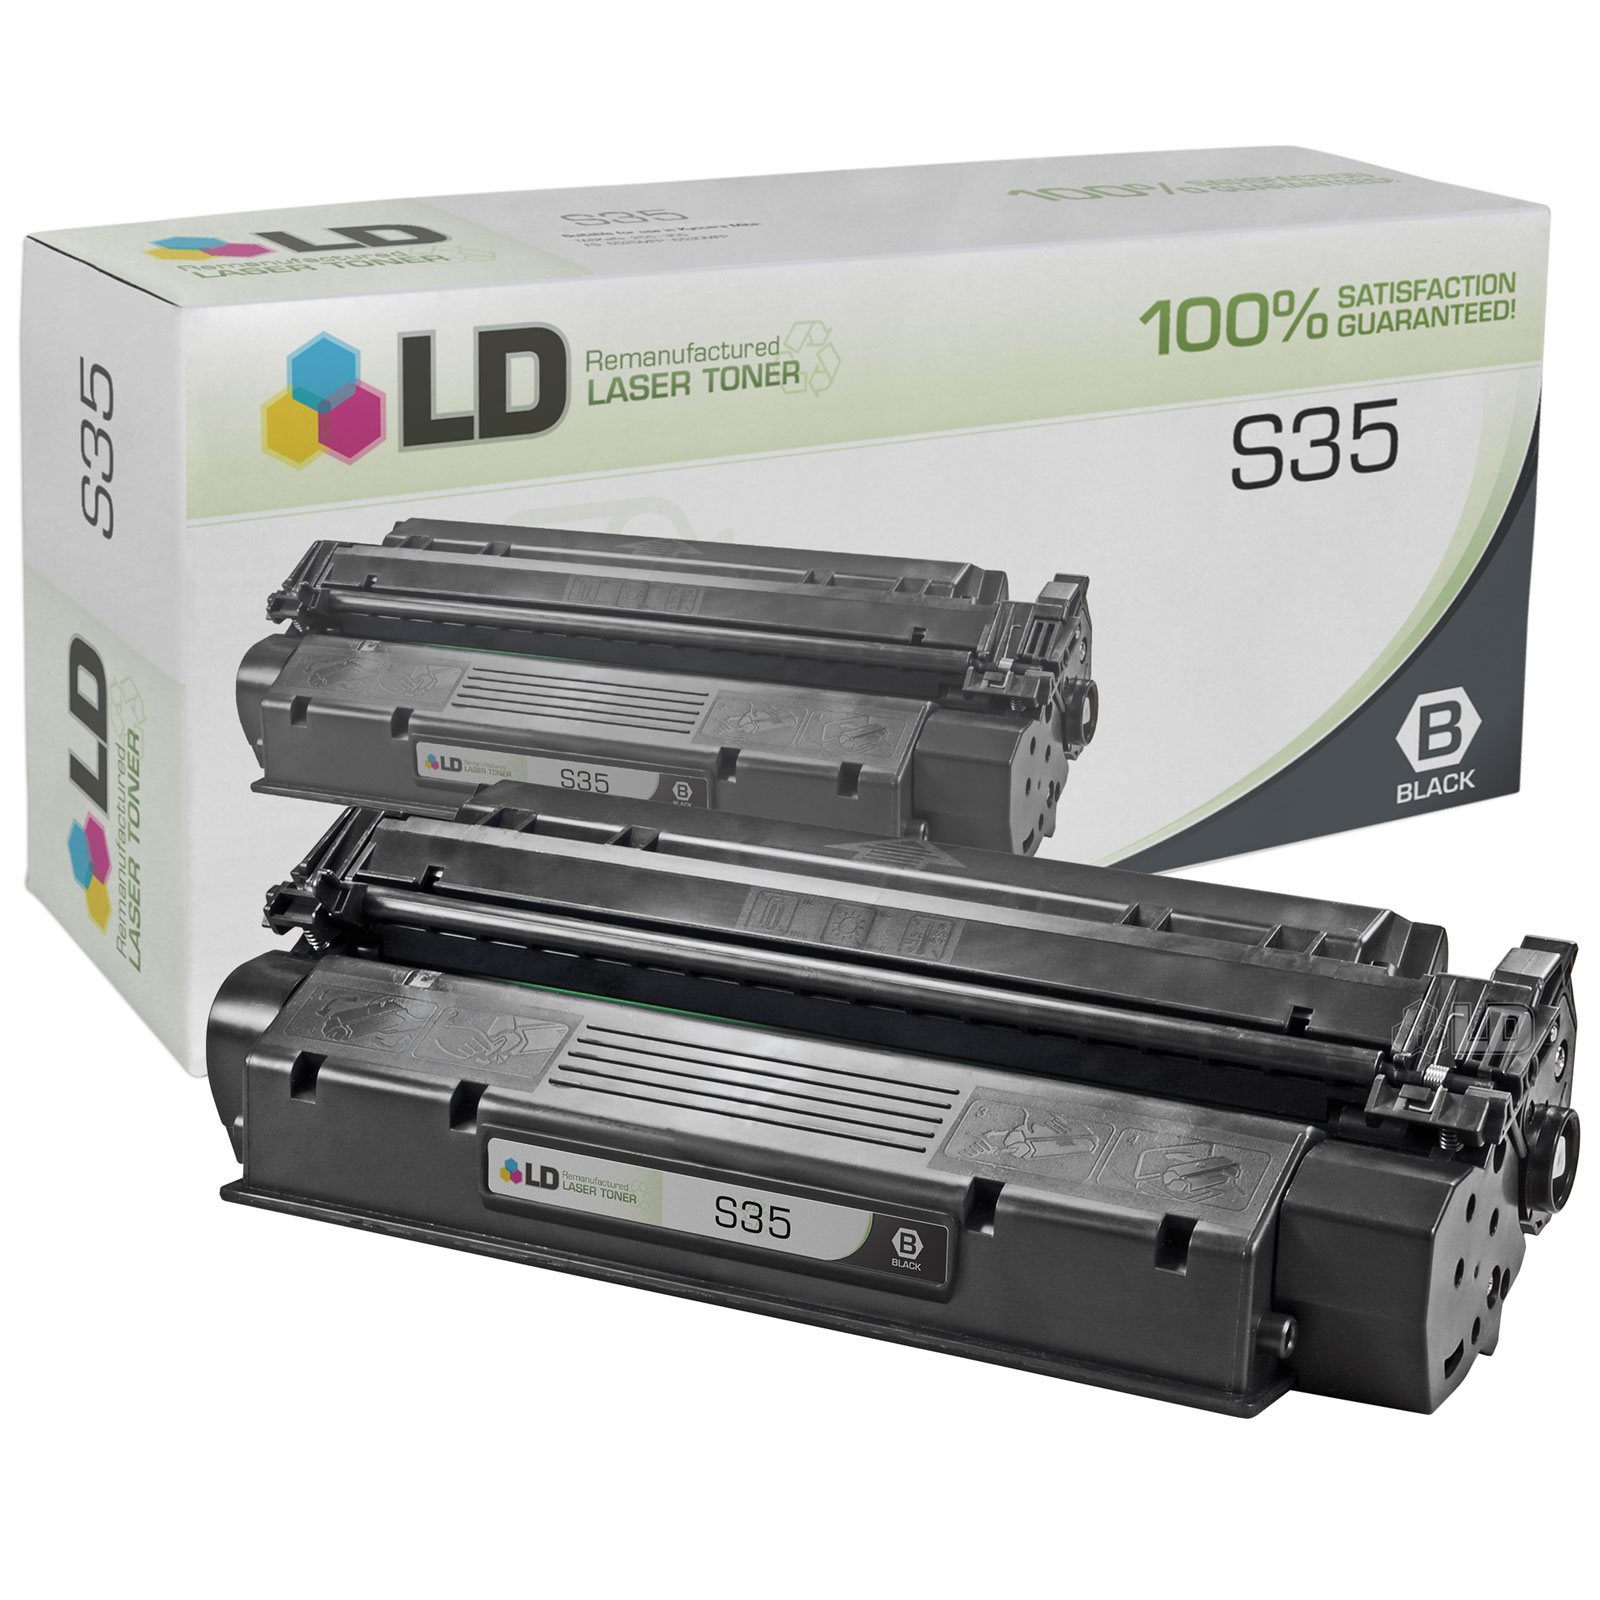 Canon Remanufactured S35 (7833A001AA) Set of 2 Black Laser Toner Cartridges - image 2 of 2